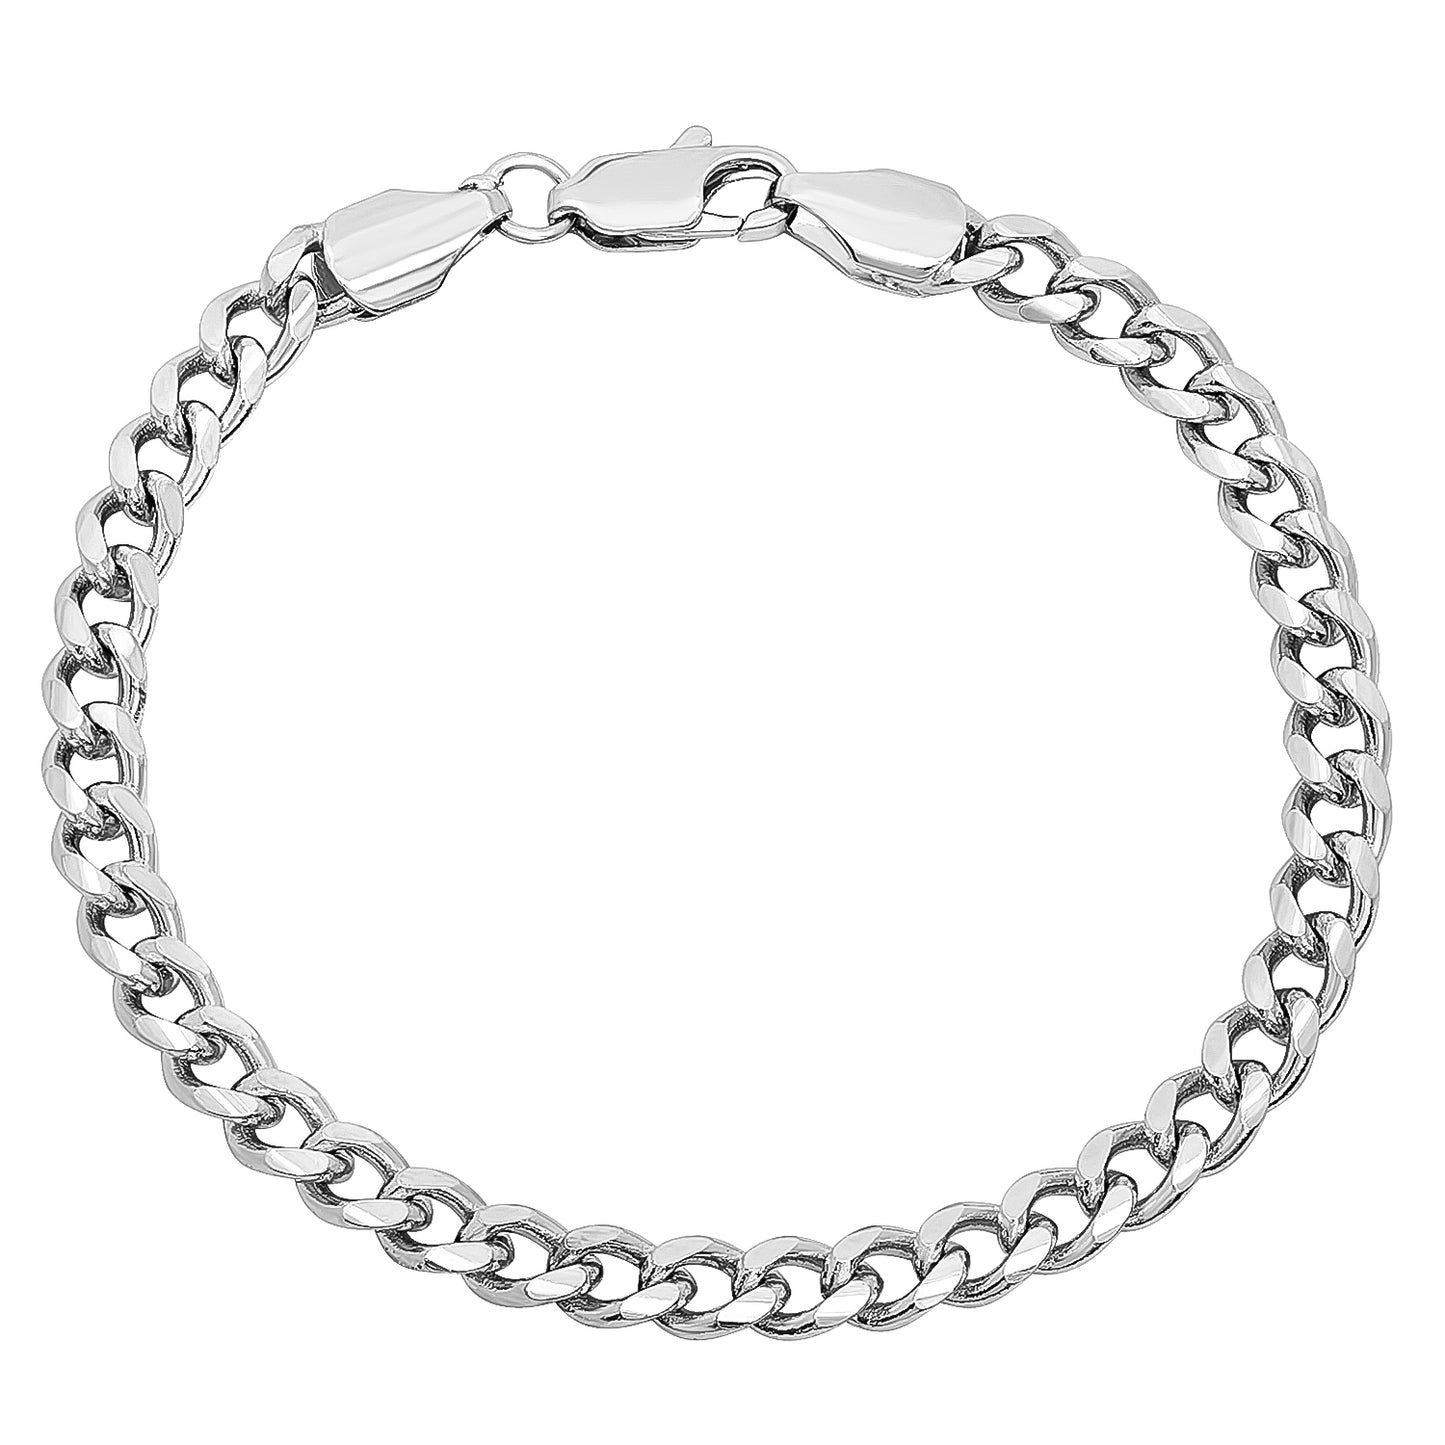 Men's 5mm 25 mills Rhodium Plated Silver Beveled Curb Chain Necklace, 7'8'20'22'24'30" (SKU: GFC132)